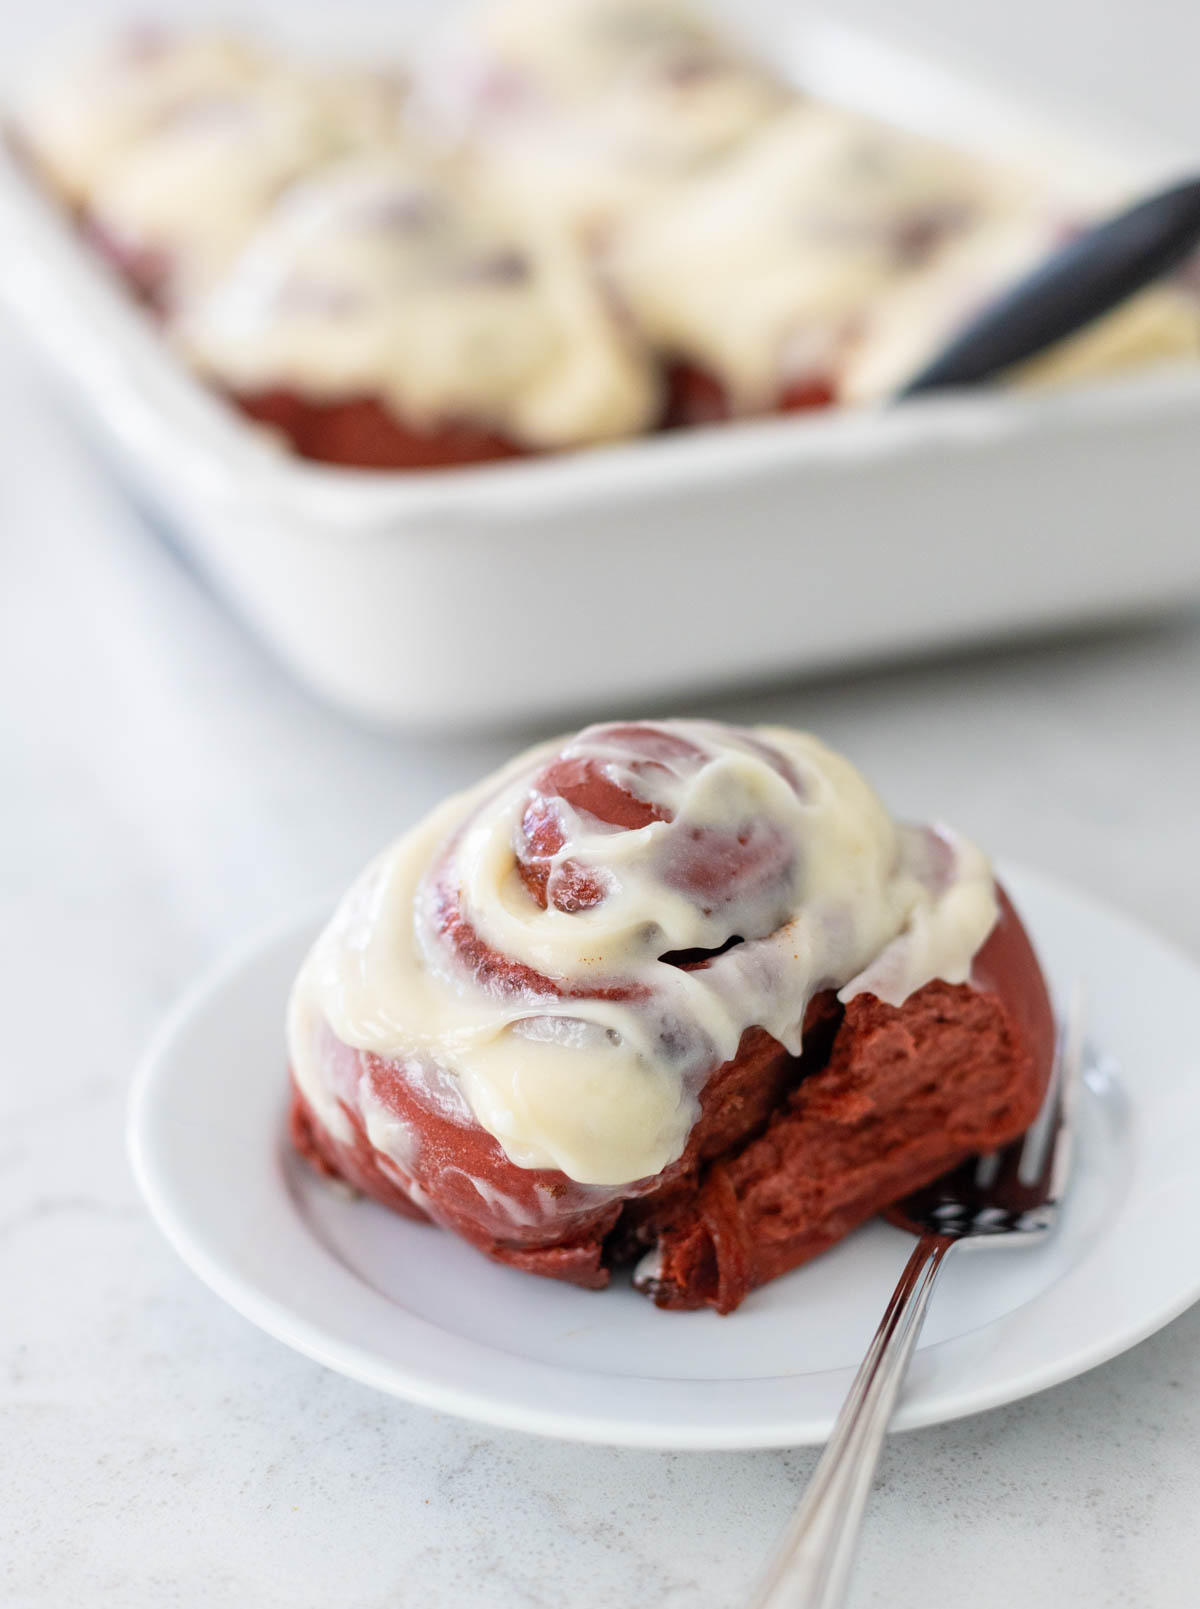 A singled cinnamon roll is on a white plate with a fork next to the baking pan filled with rolls.